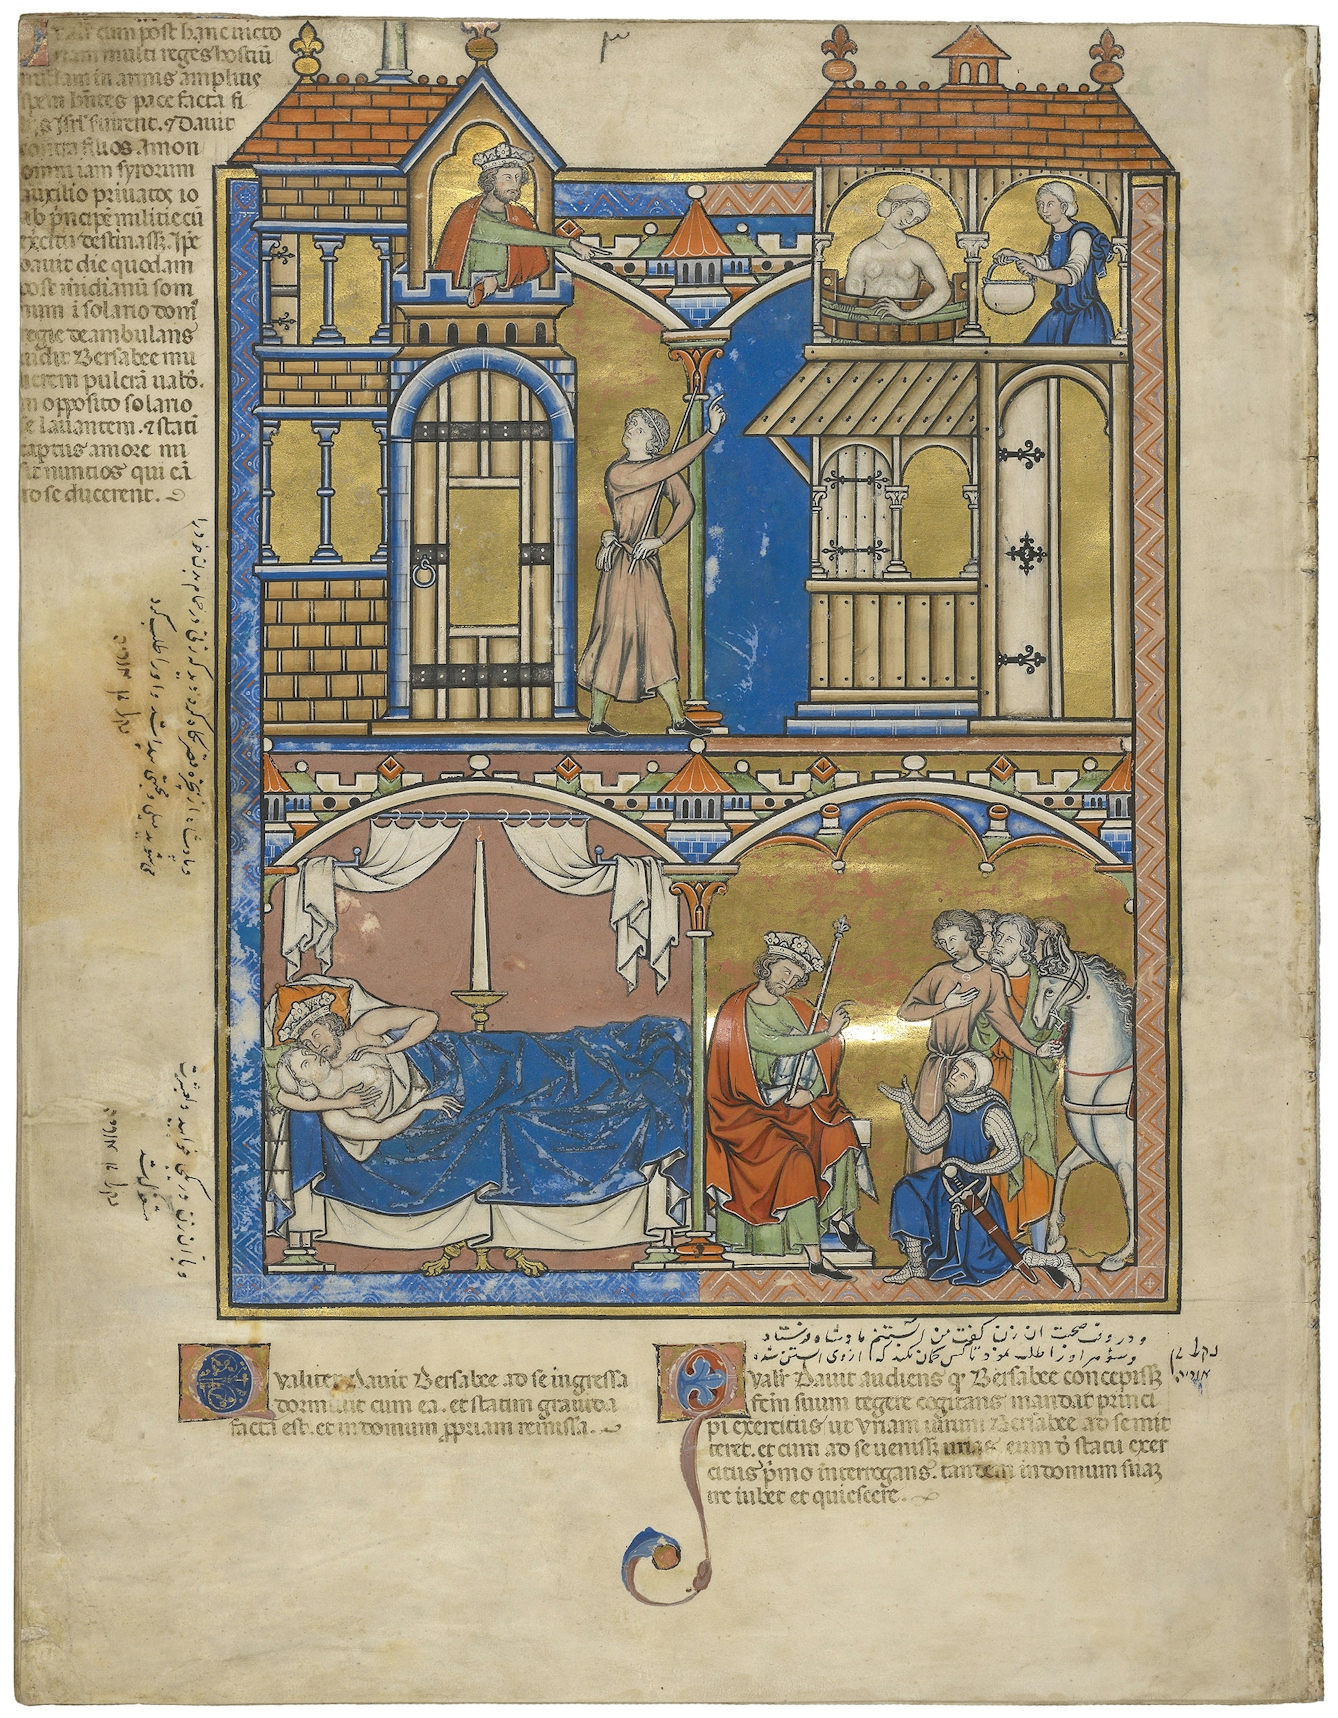 An illustrated manuscript with three panels, showing the biblical story of David and Bathsheba.